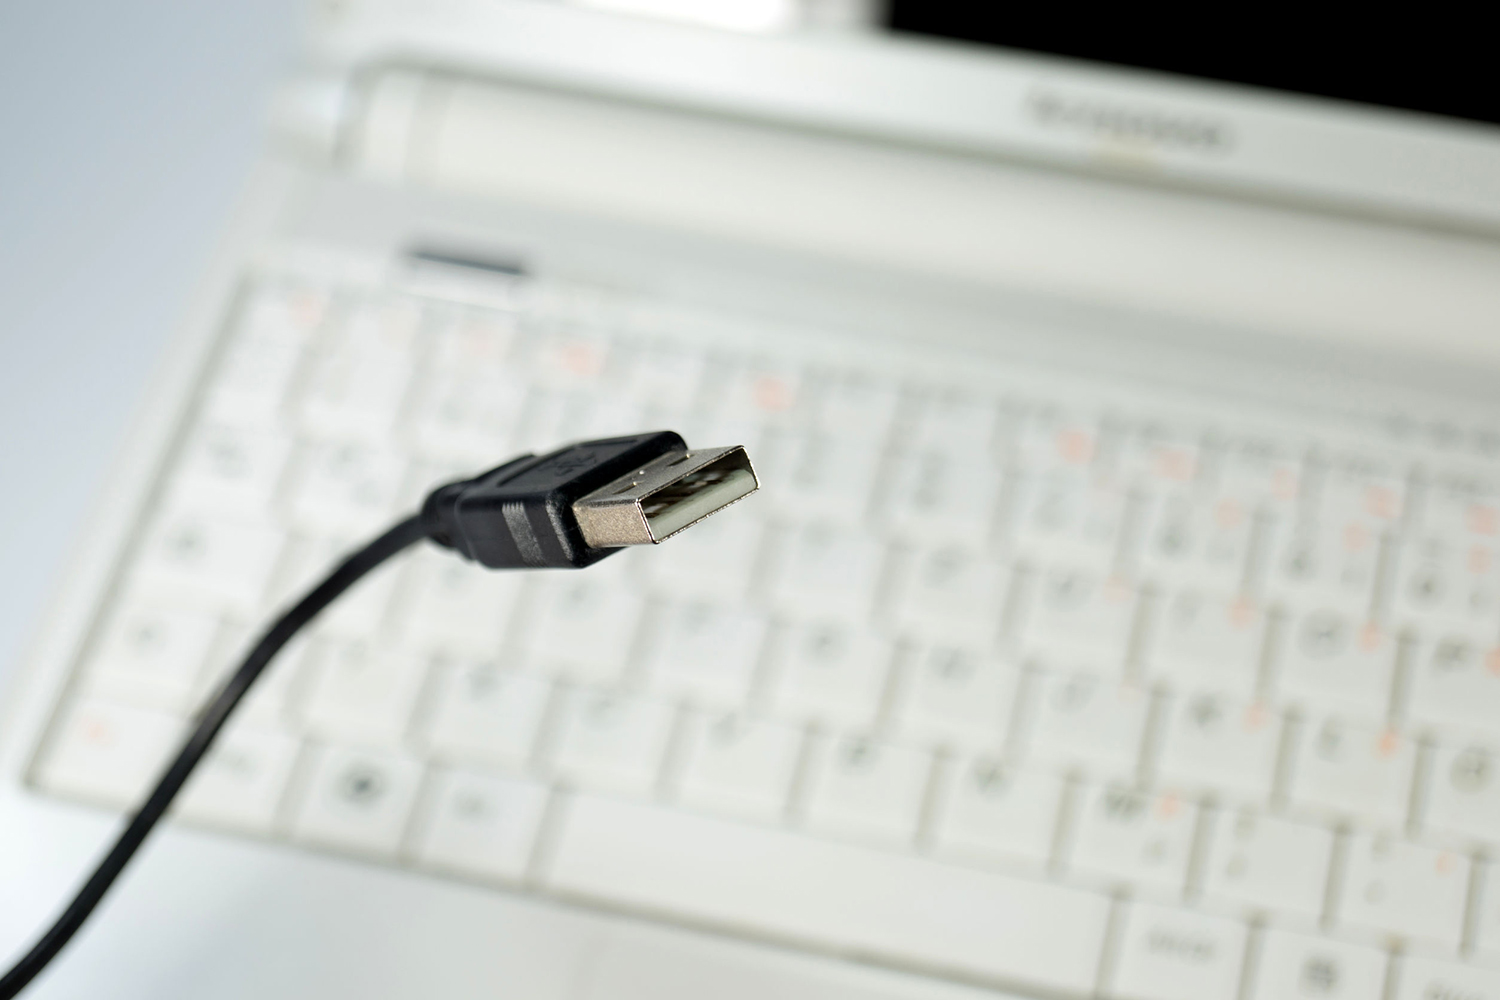 USB Type C and USB 3.2 – Clarifying the Connection